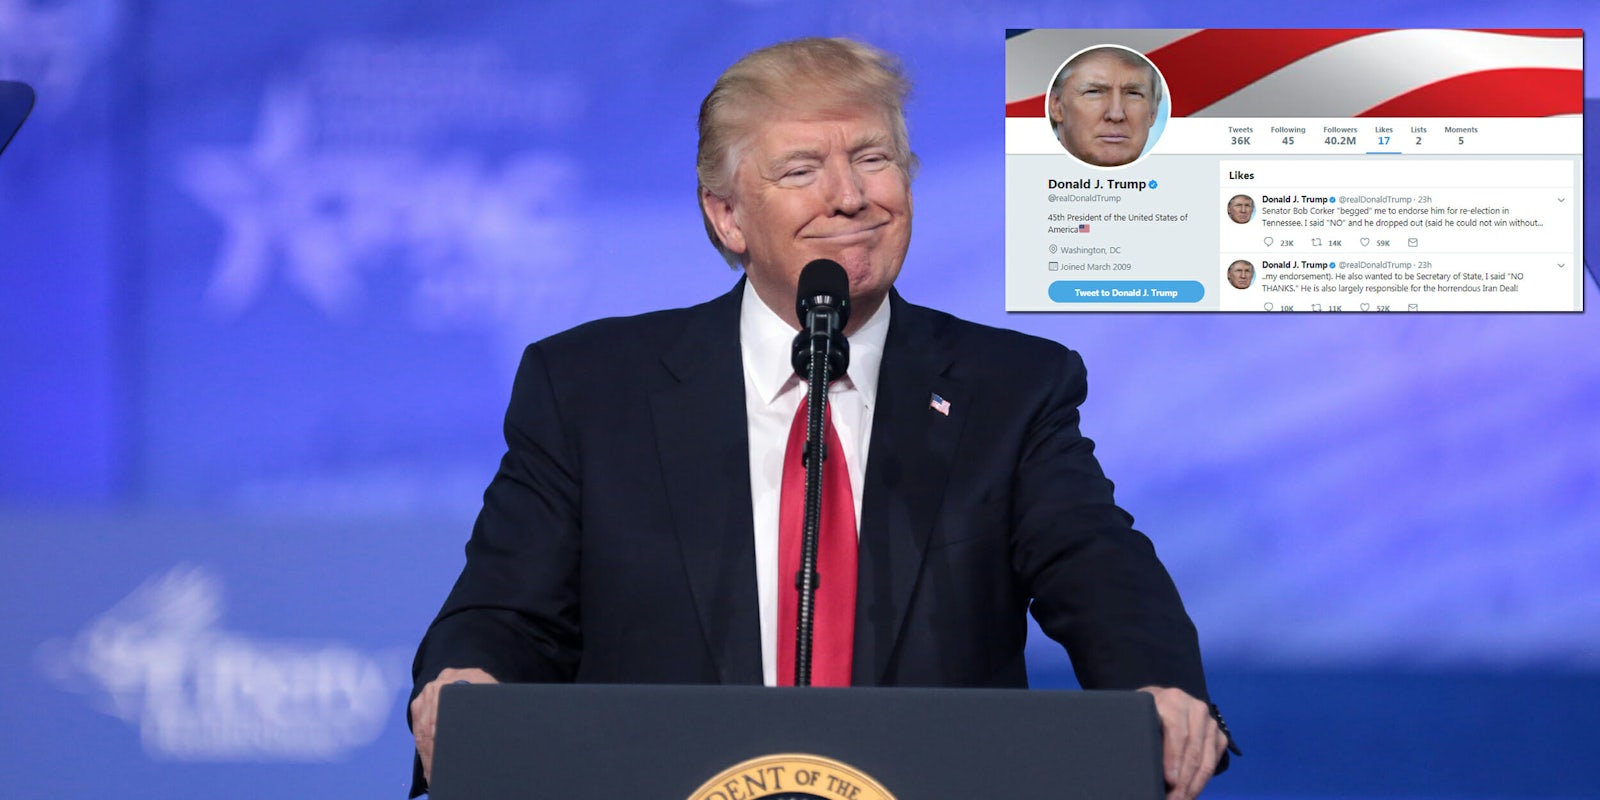 Donald Trump liked Twitter insults about Bob Corker.